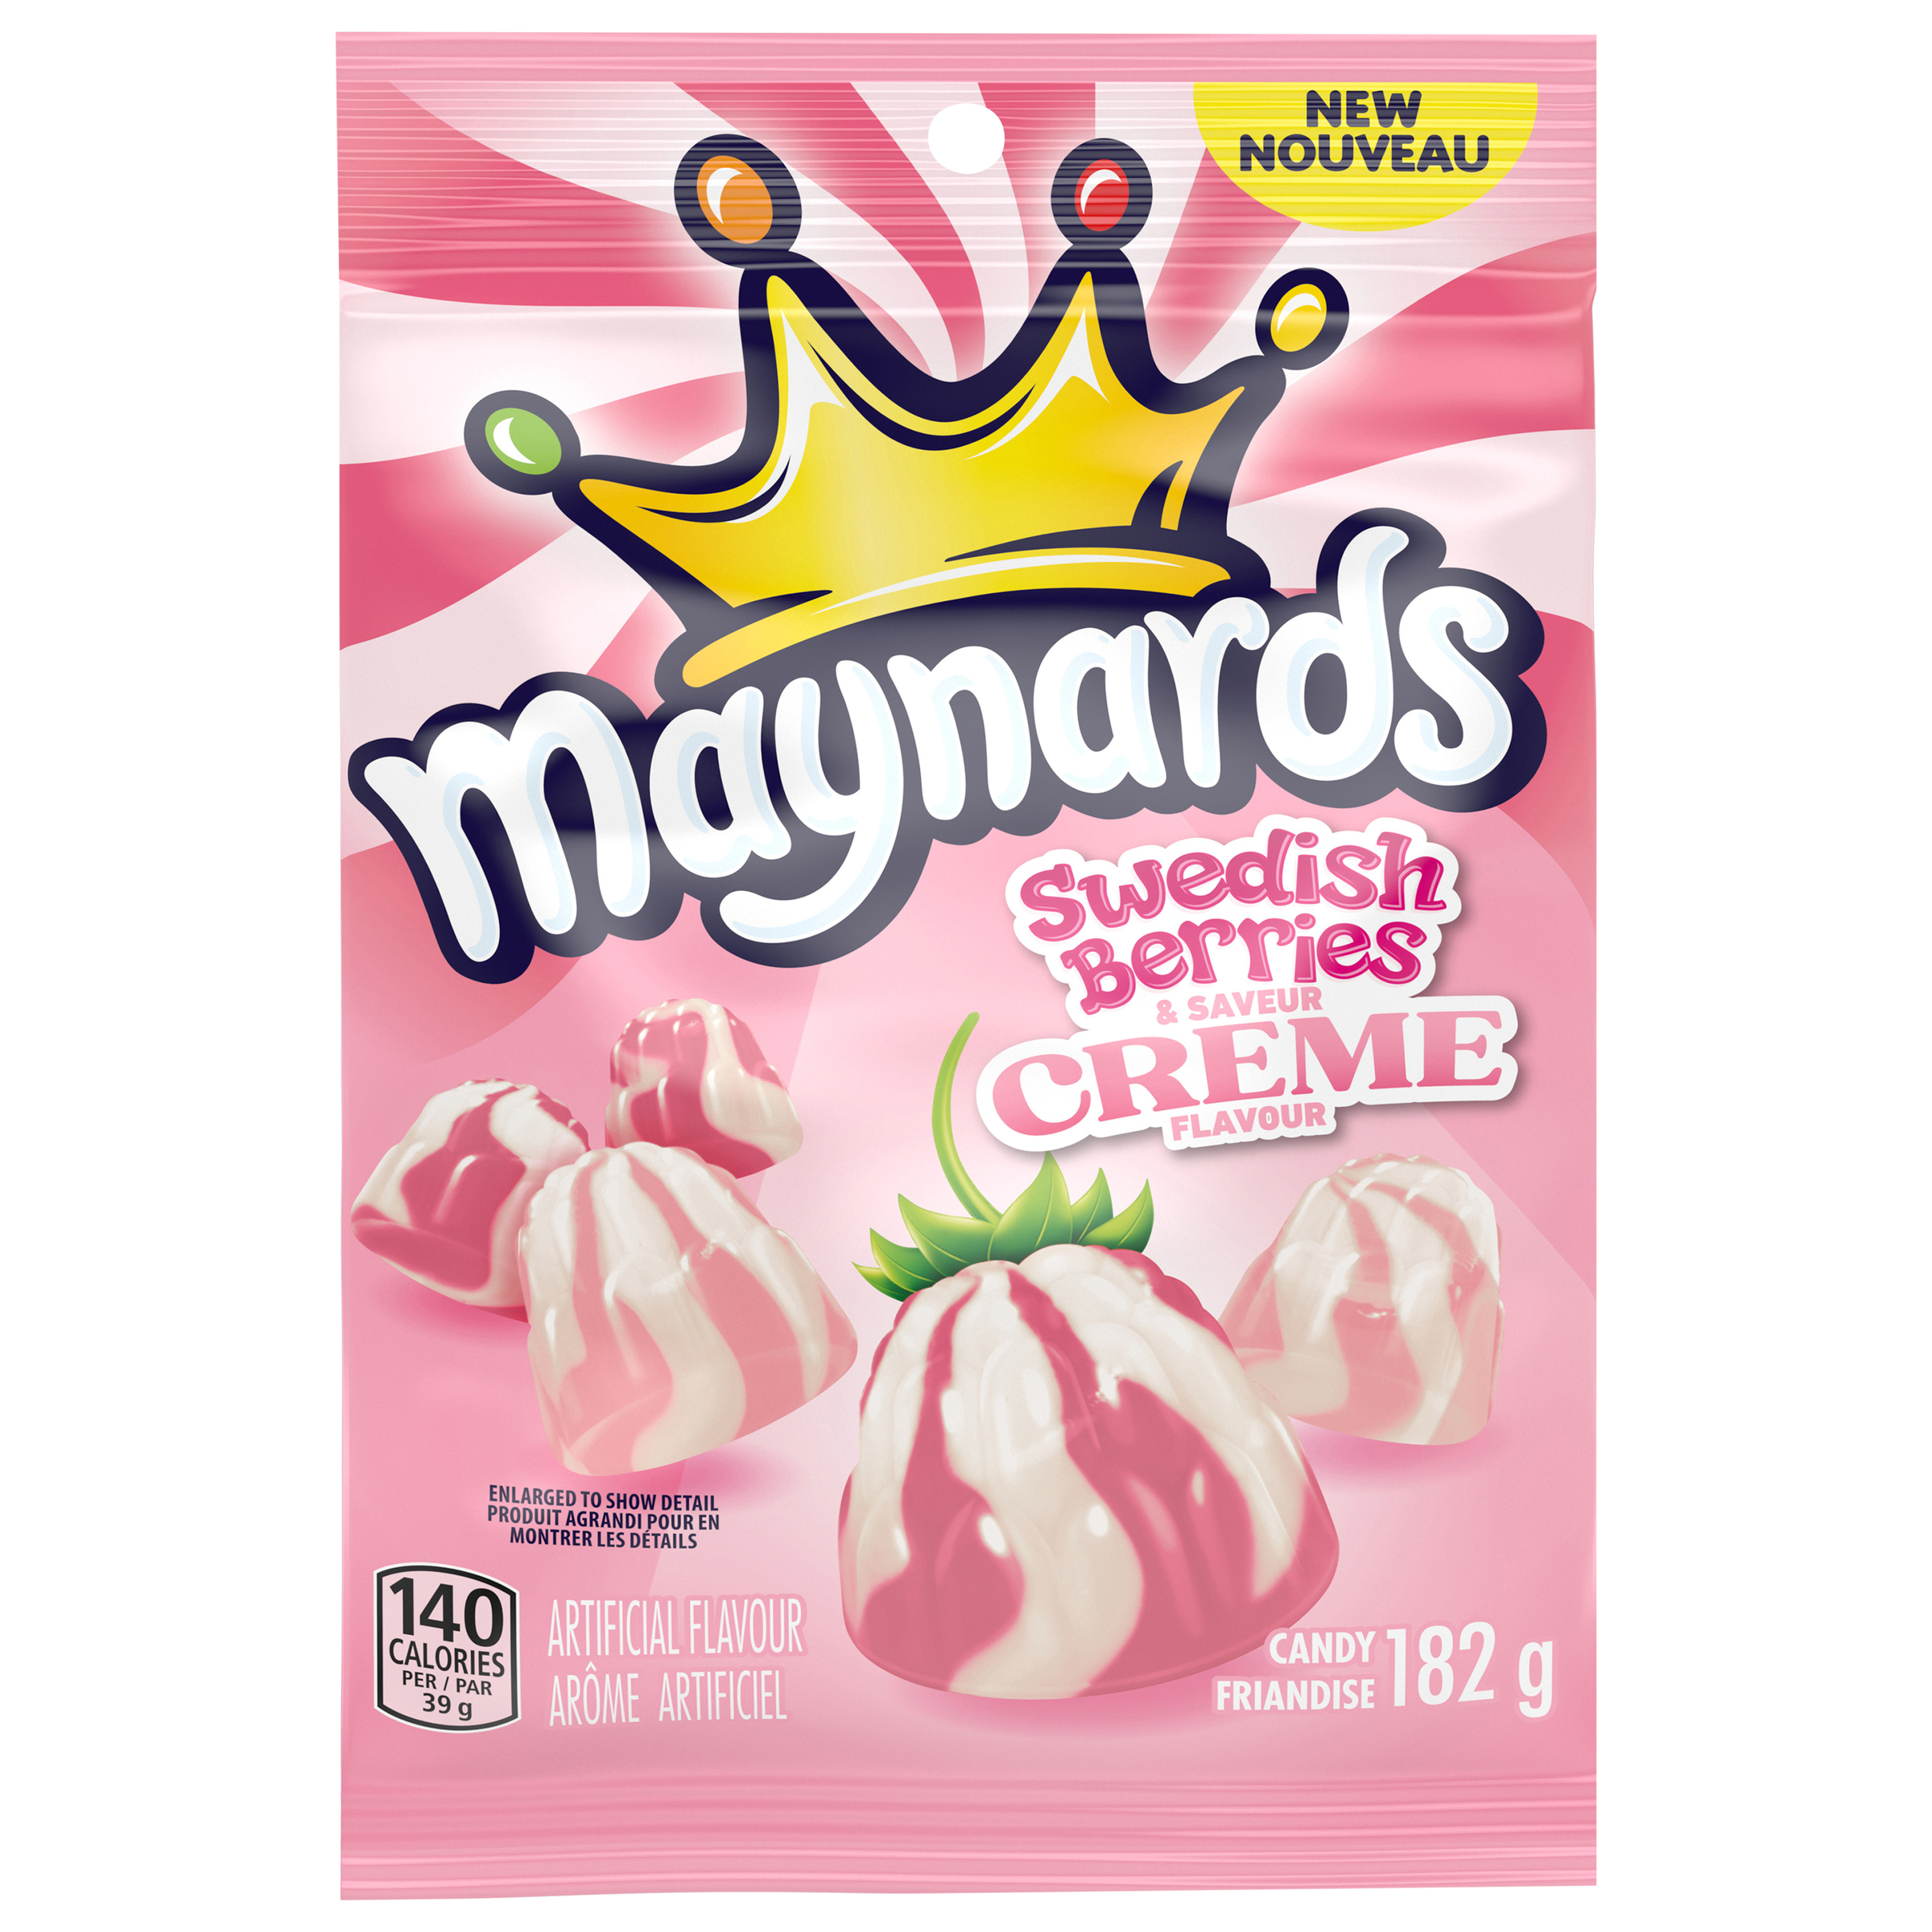 MAYNARDS SWEDISH BERRIES & CREME FLAVOUR  CANDY 182 GR-0